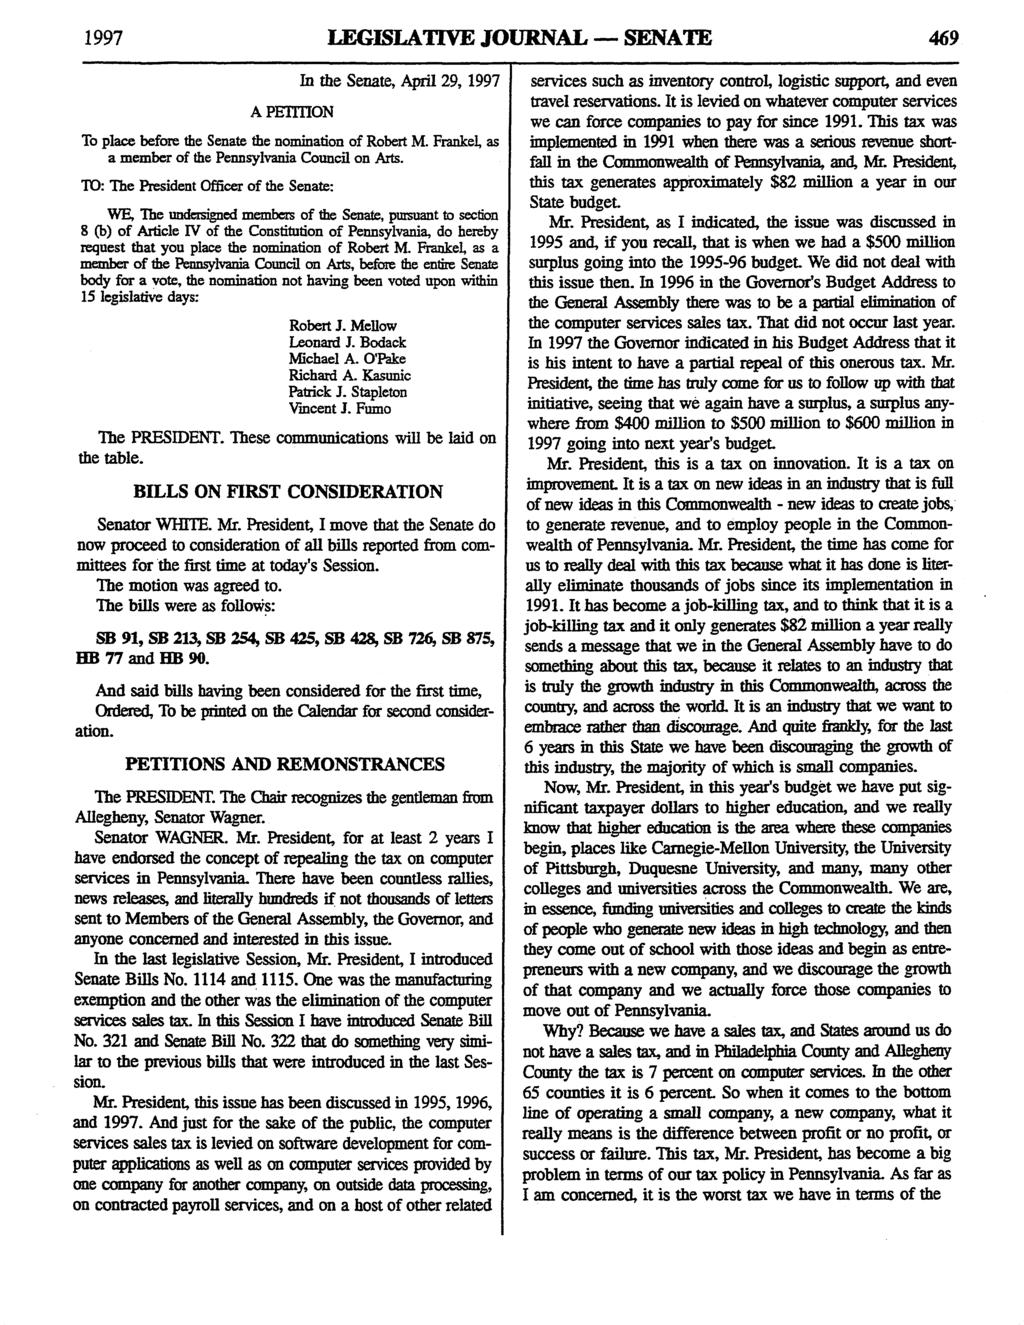 1997 LEGISLATIVE JOURNAL - SENATE 469 A PETITION To place before the Senate the nomination of Robert M. Frankel, as a member of the Pennsylvania Council on Arts.